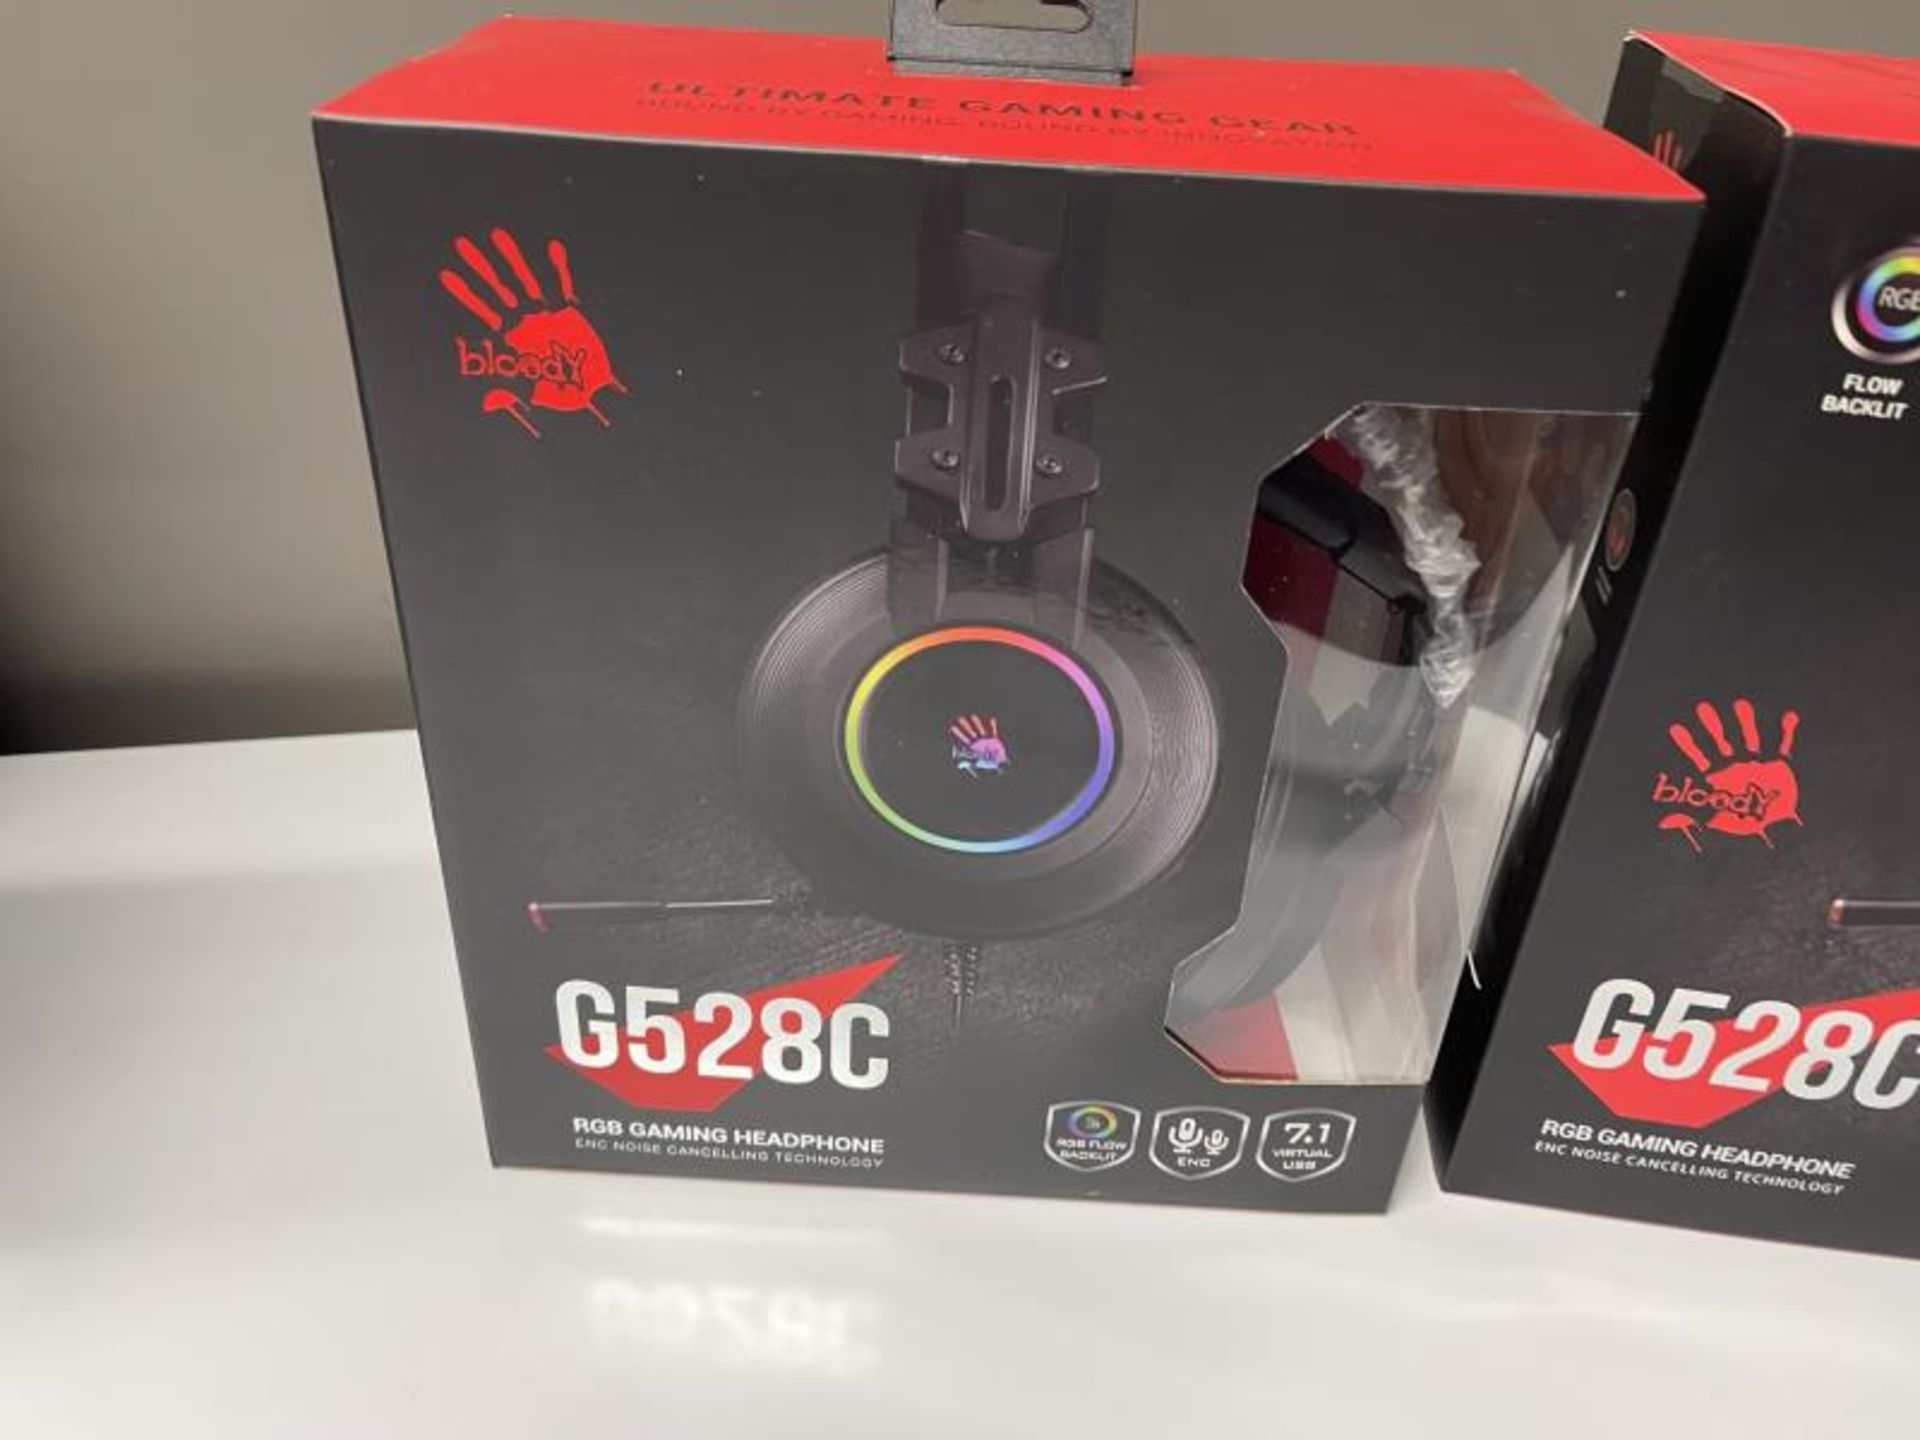 (2) New In The Box Bloody G528C Gaming Headsets - Image 2 of 4